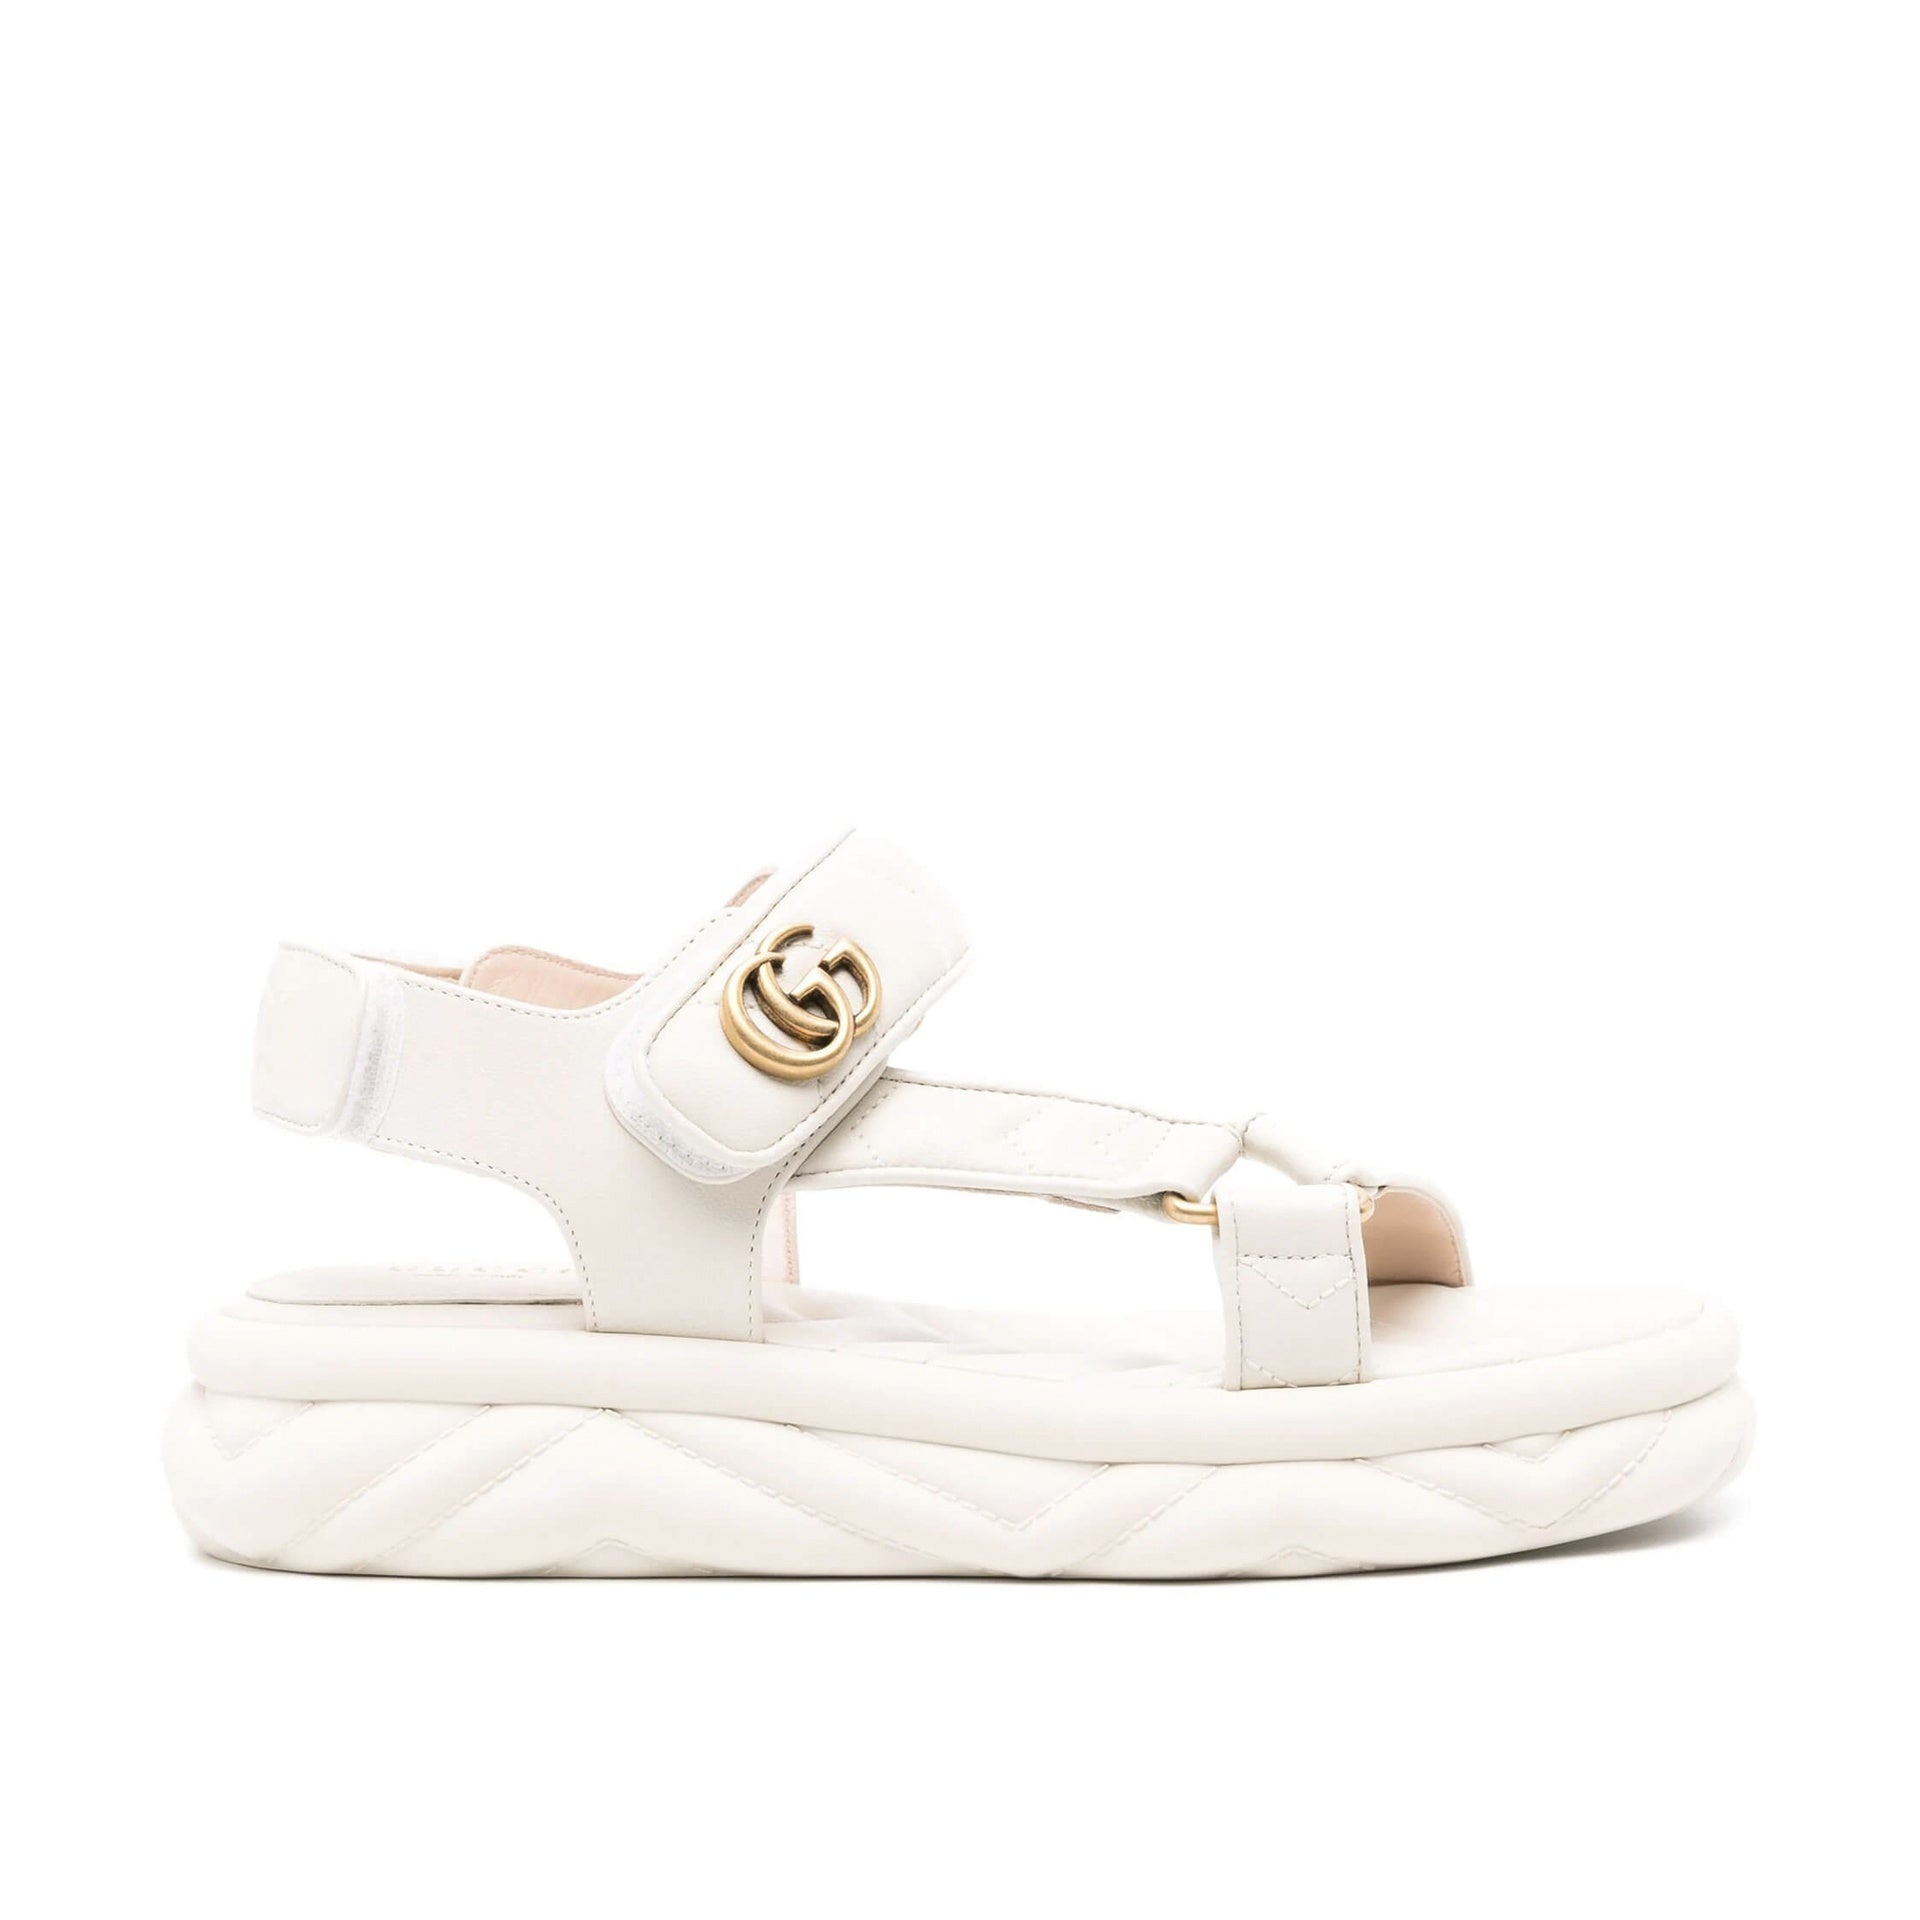 Gucci Leather Double G Sandals - 1